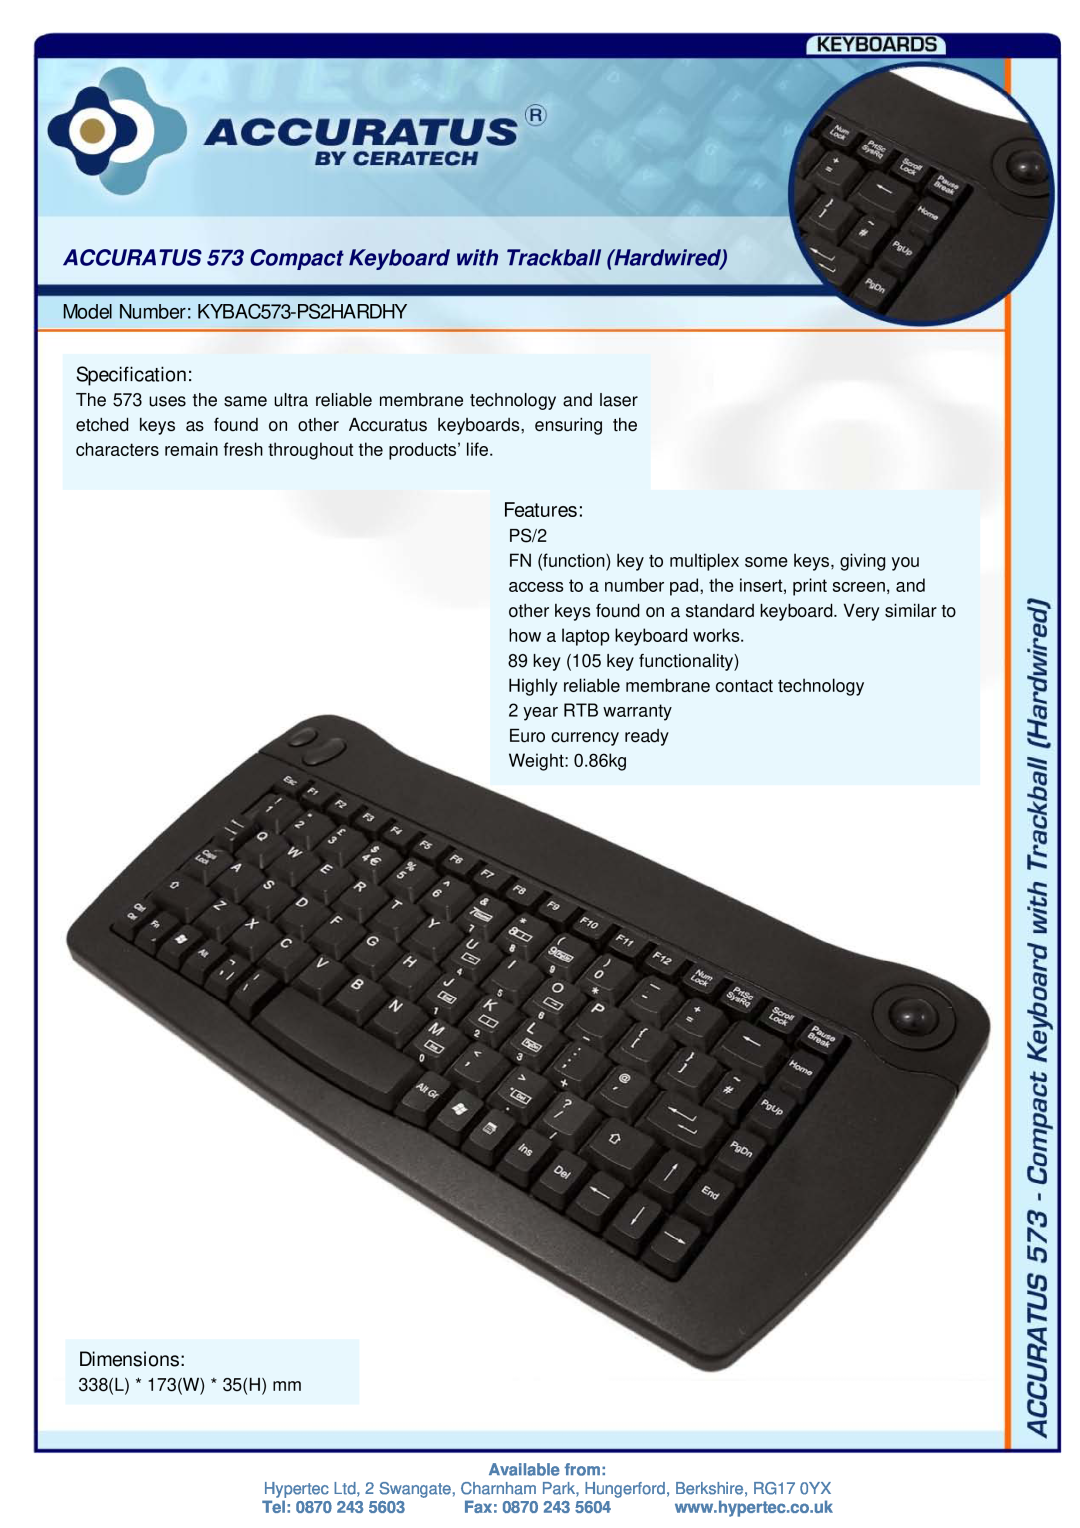 Hypertec KYBAC573-PS2HARDHY dimensions ACCURATUS 573 Compact Keyboard with Trackball Hardwired, Features, Dimensions 